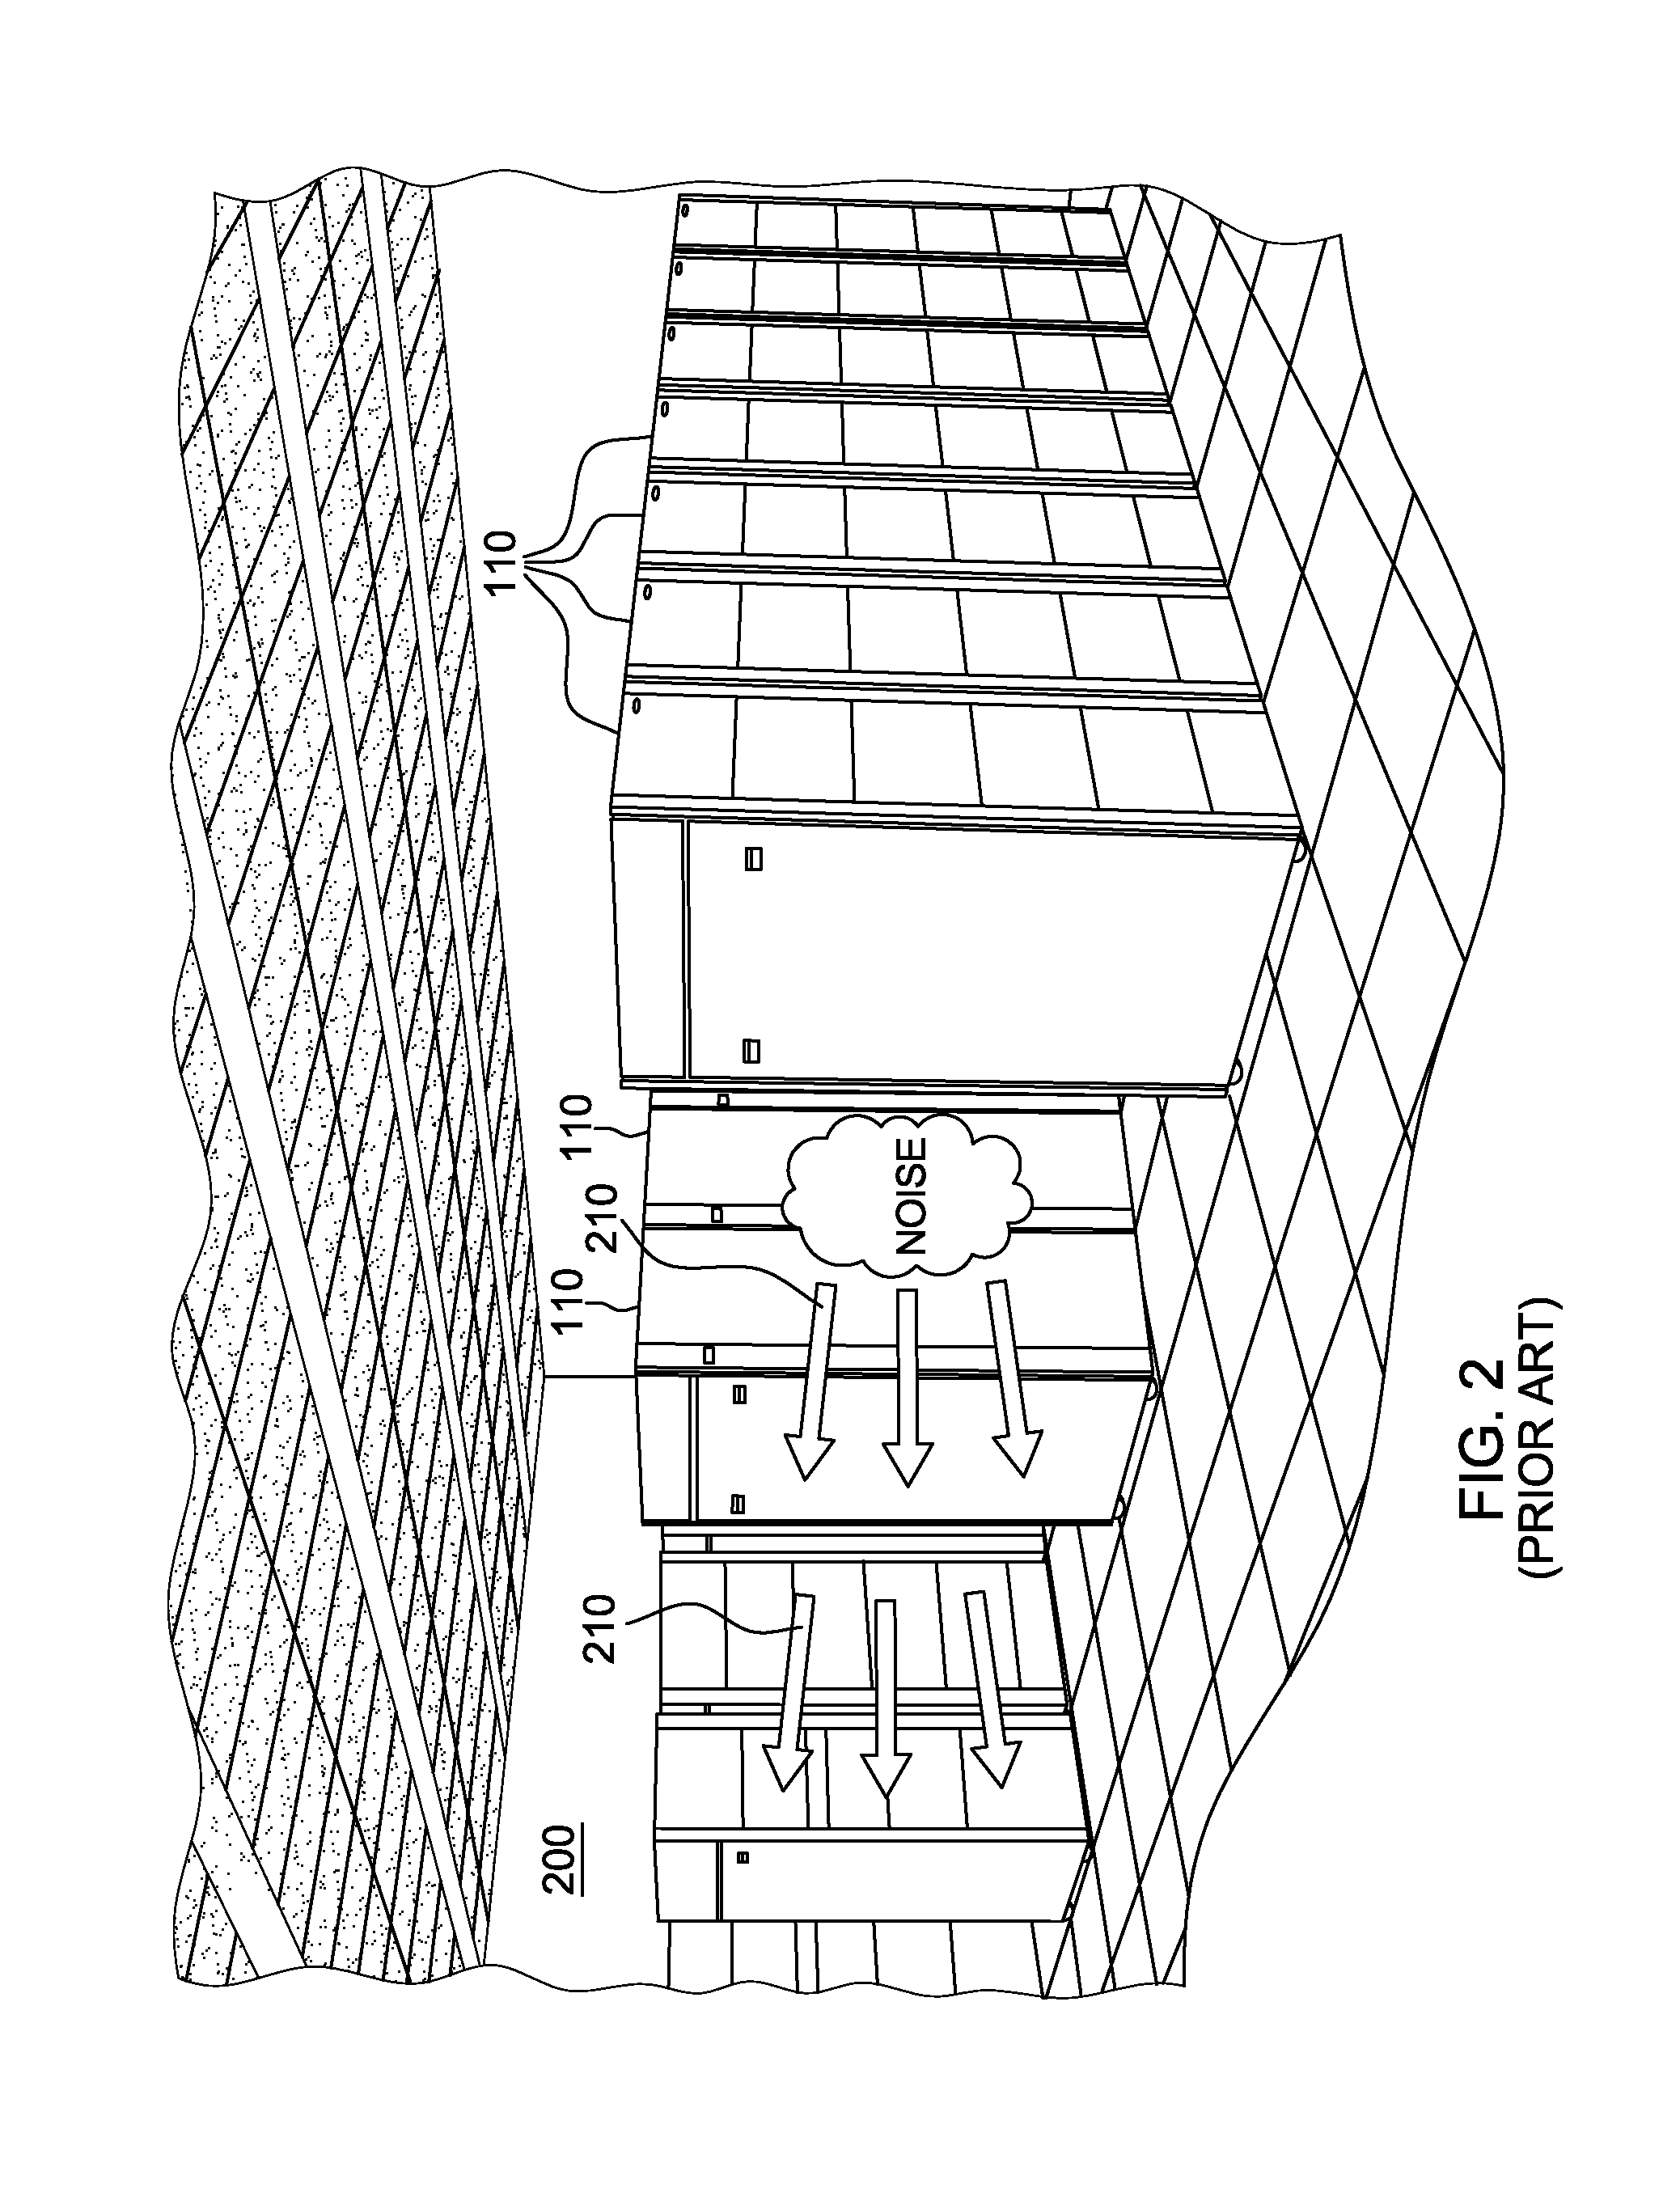 Acoustically absorptive apparatus for an electronics rack of a data center